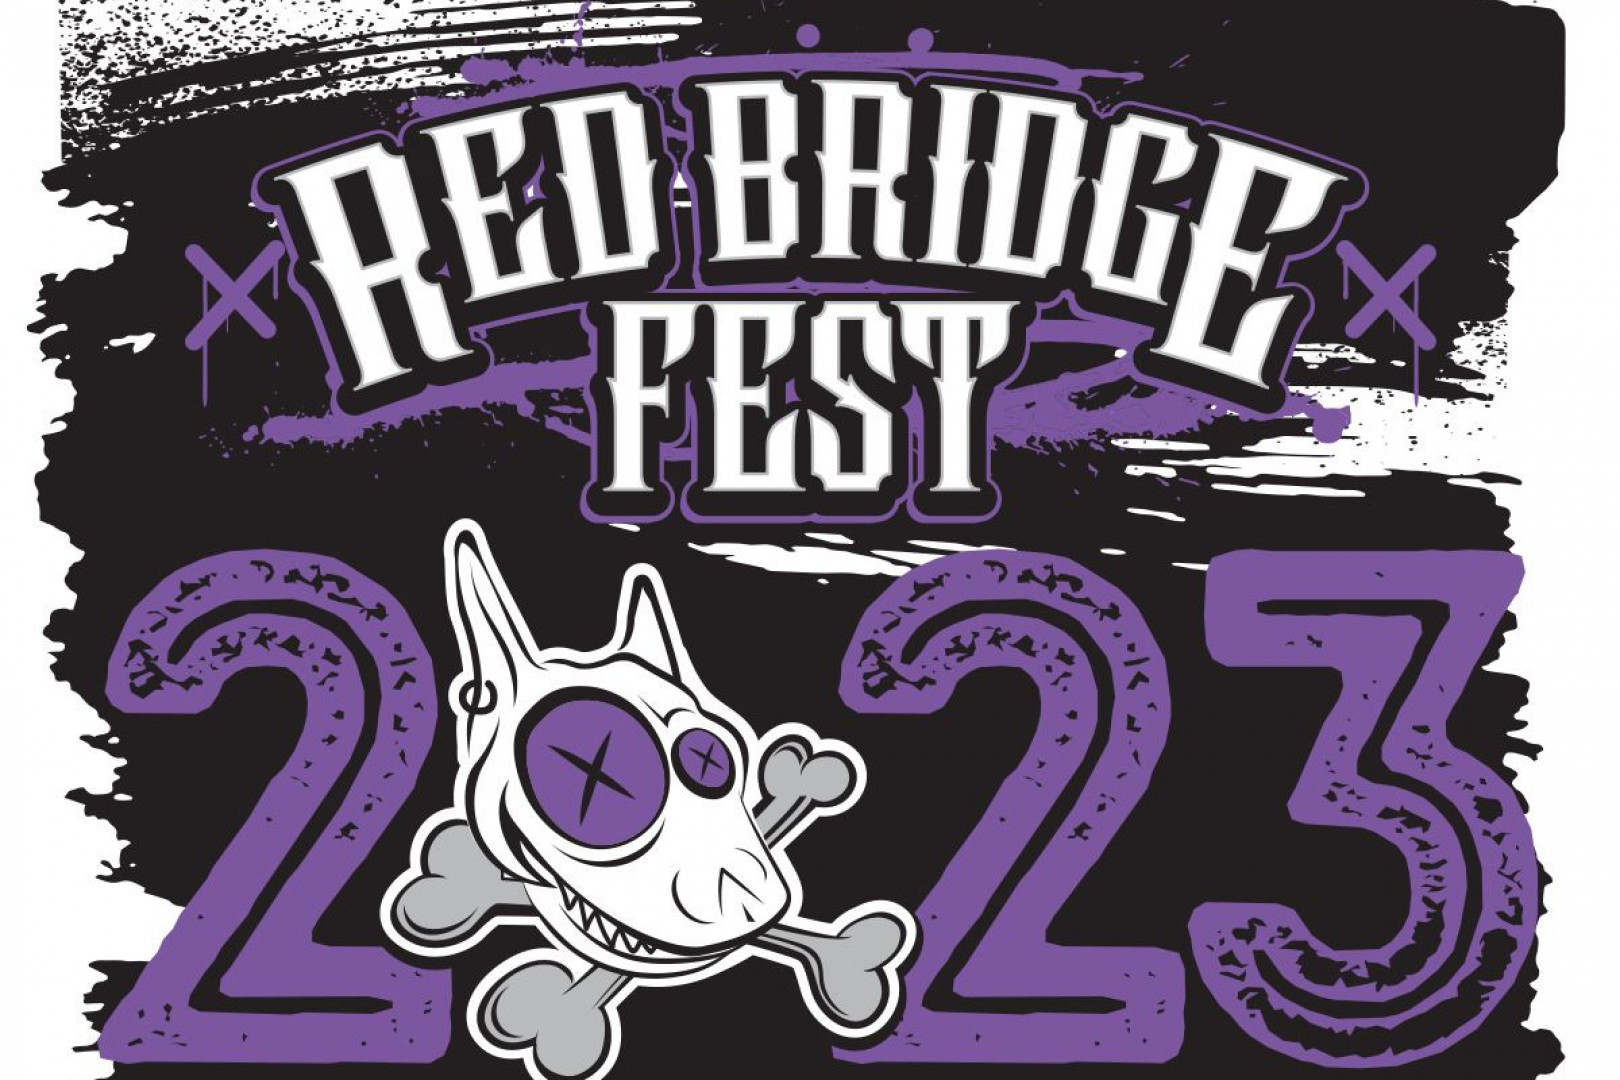 Red Bridge Fest announce more bands for their 2023 festival